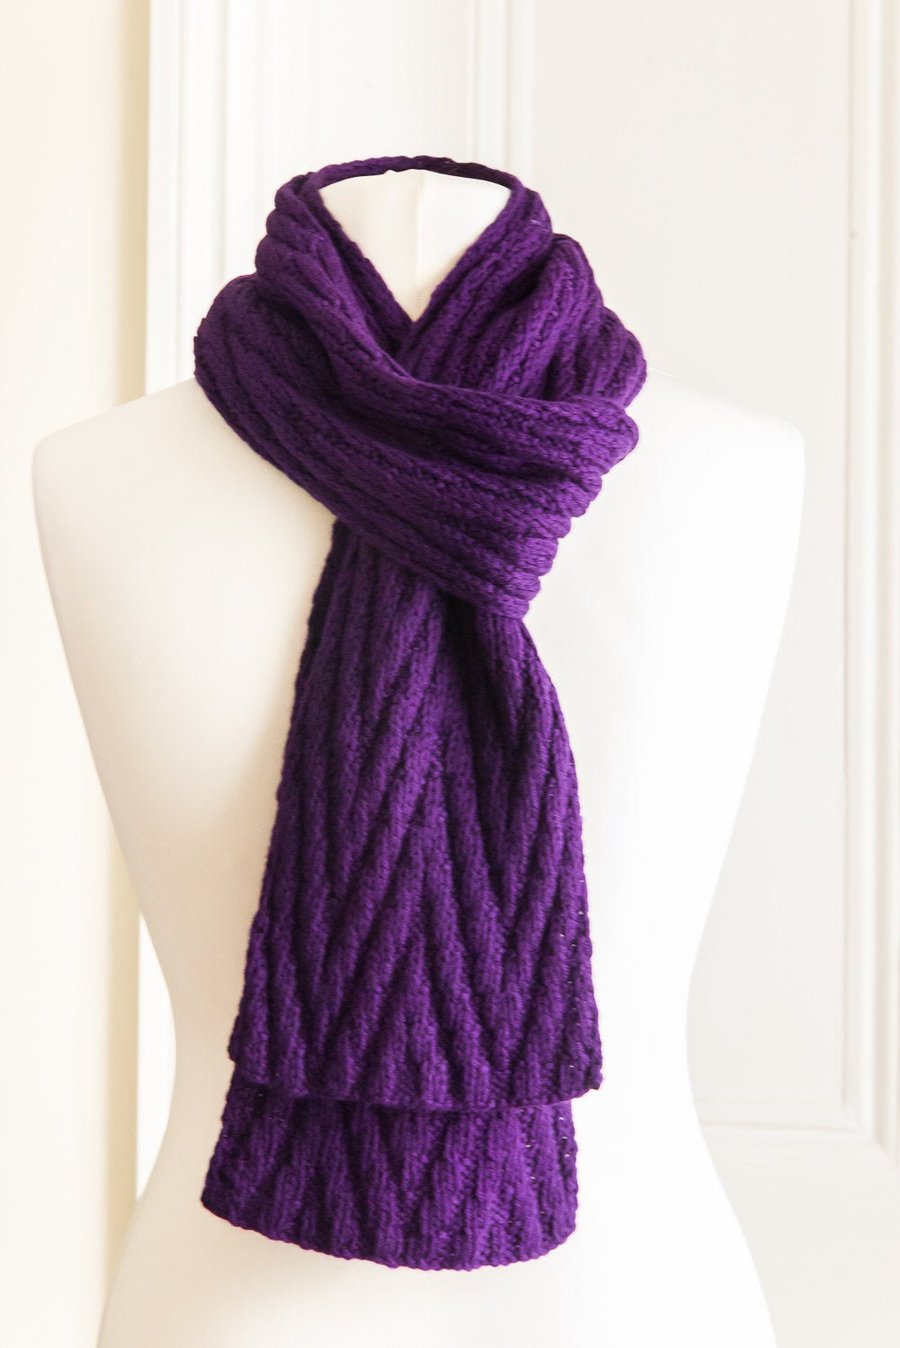 This scarf would be great for a guy or a girl - warm, reversible, hand knit